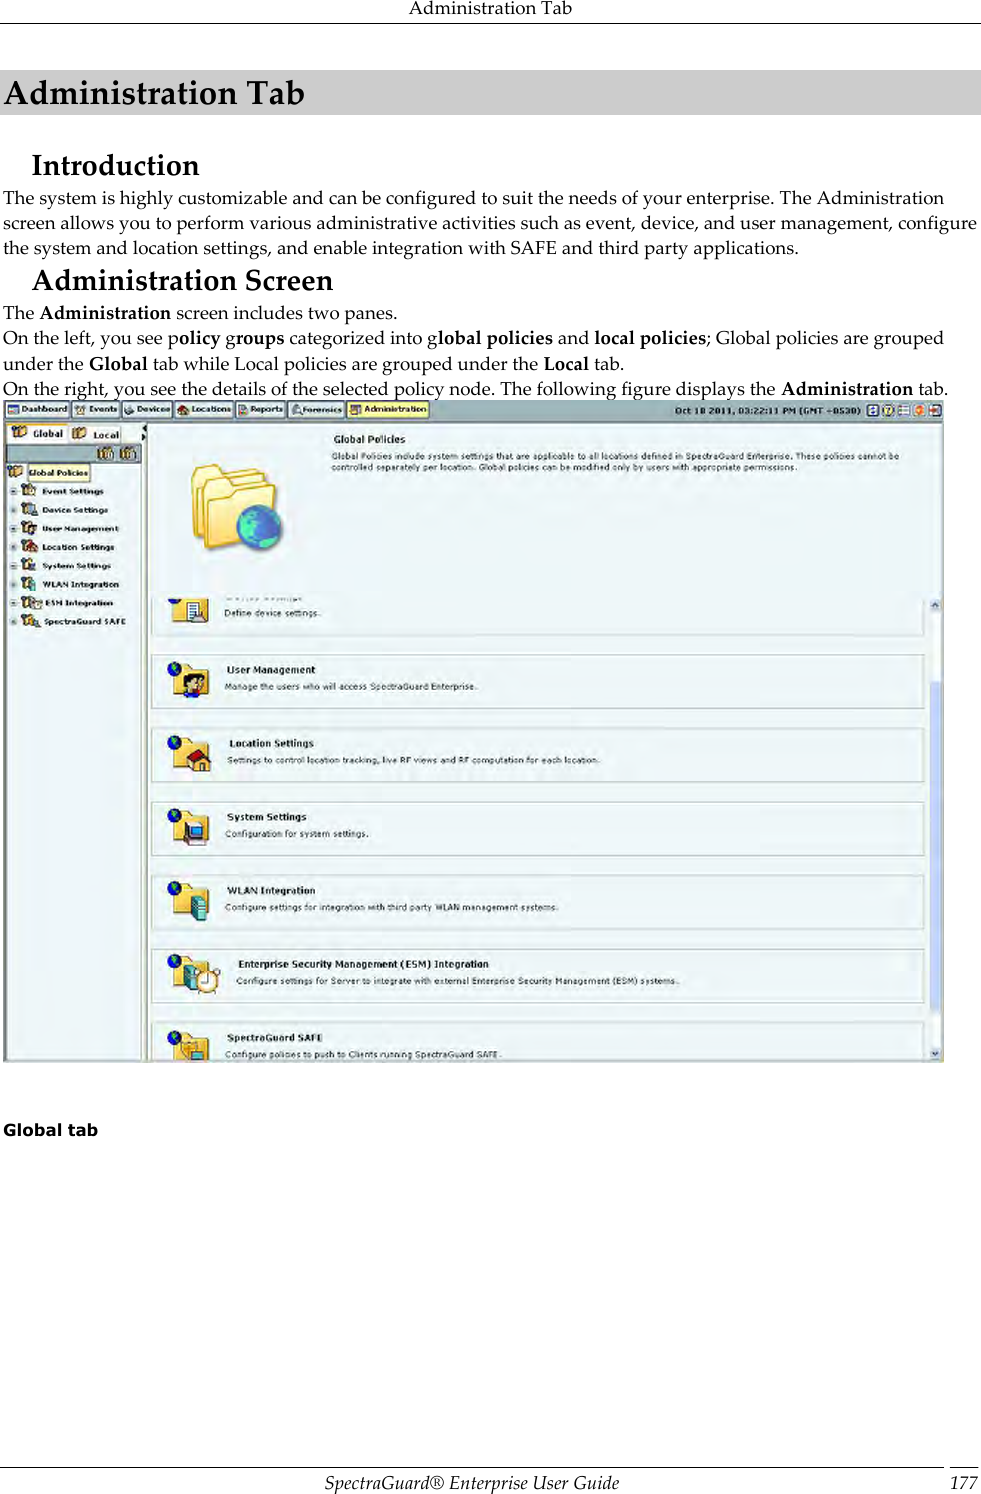 Administration Tab SpectraGuard®  Enterprise User Guide 177 Administration Tab Introduction The system is highly customizable and can be configured to suit the needs of your enterprise. The Administration screen allows you to perform various administrative activities such as event, device, and user management, configure the system and location settings, and enable integration with SAFE and third party applications. Administration Screen The Administration screen includes two panes. On the left, you see policy groups categorized into global policies and local policies; Global policies are grouped under the Global tab while Local policies are grouped under the Local tab. On the right, you see the details of the selected policy node. The following figure displays the Administration tab.      Global tab   